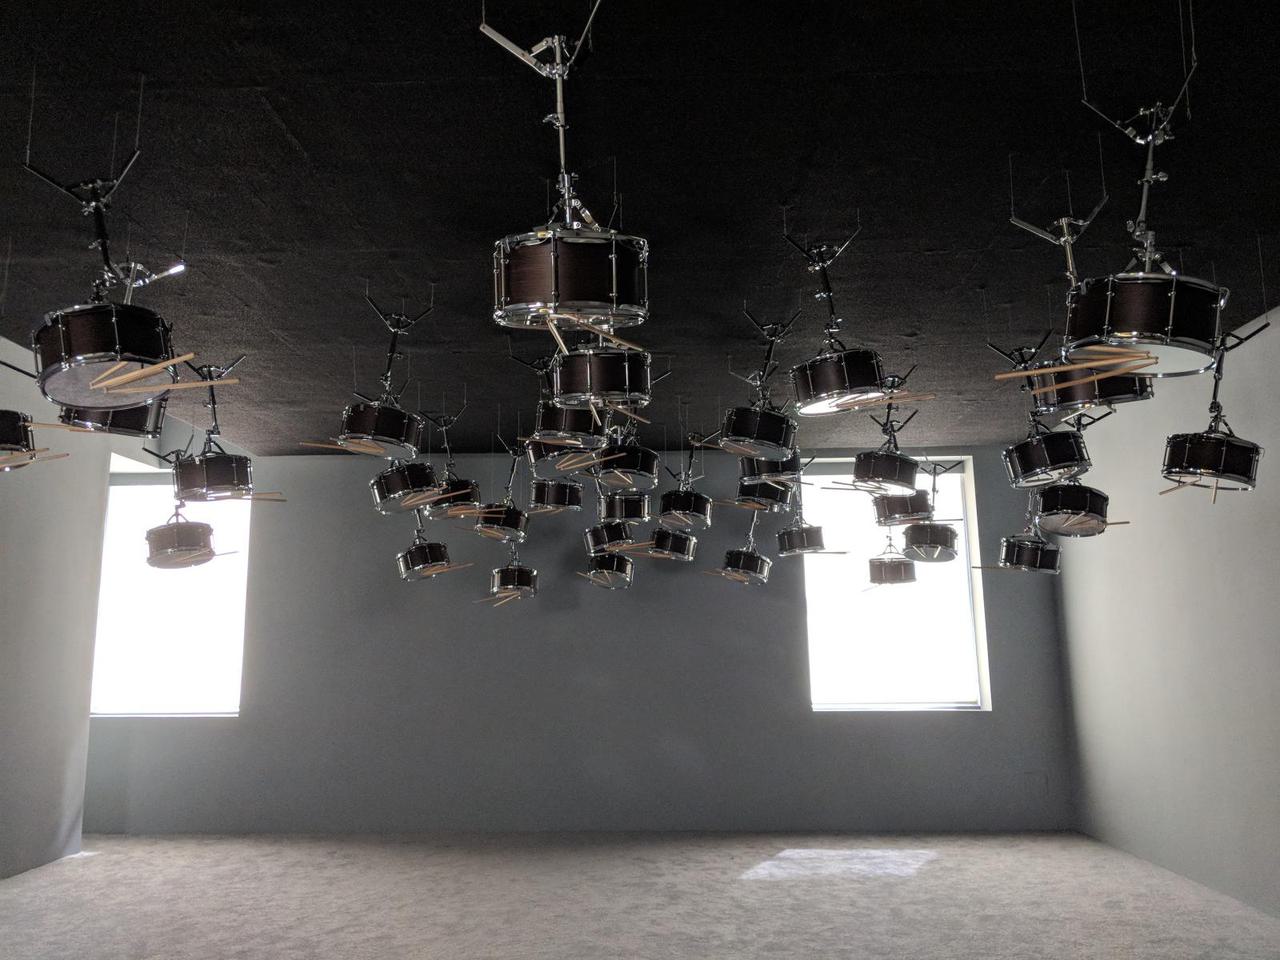 empty room with several dozen snare drums attached to the ceiling.